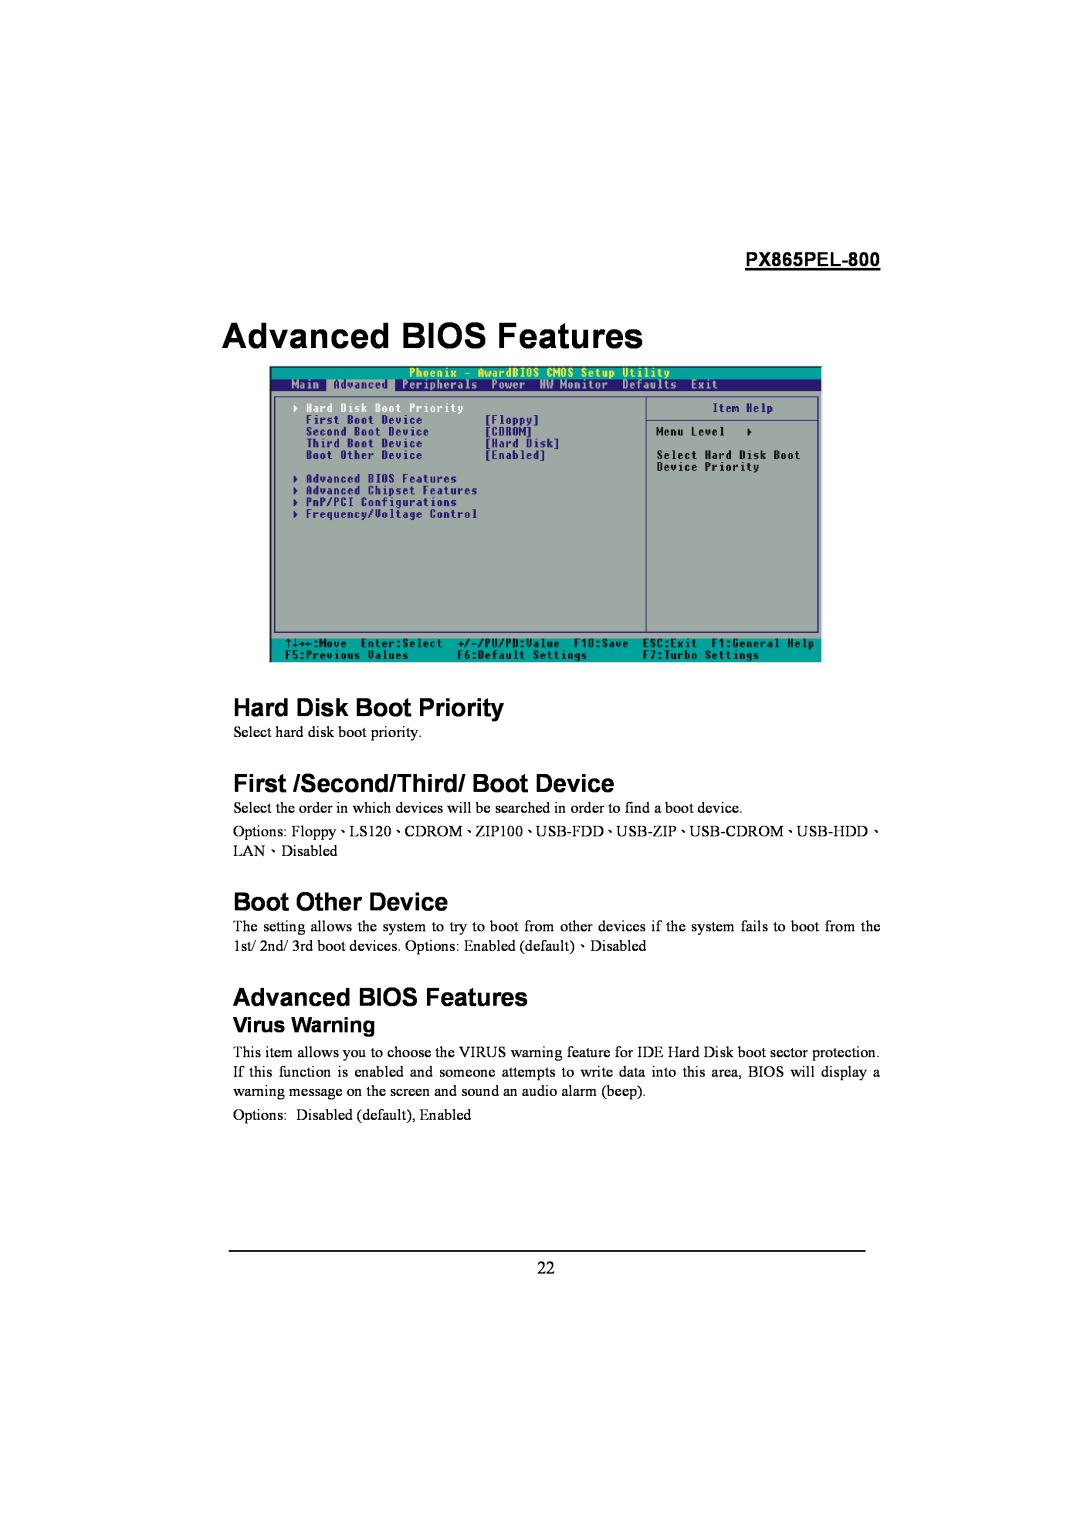 Intel PX865PEL-800 Advanced BIOS Features, Hard Disk Boot Priority, First /Second/Third/ Boot Device, Boot Other Device 